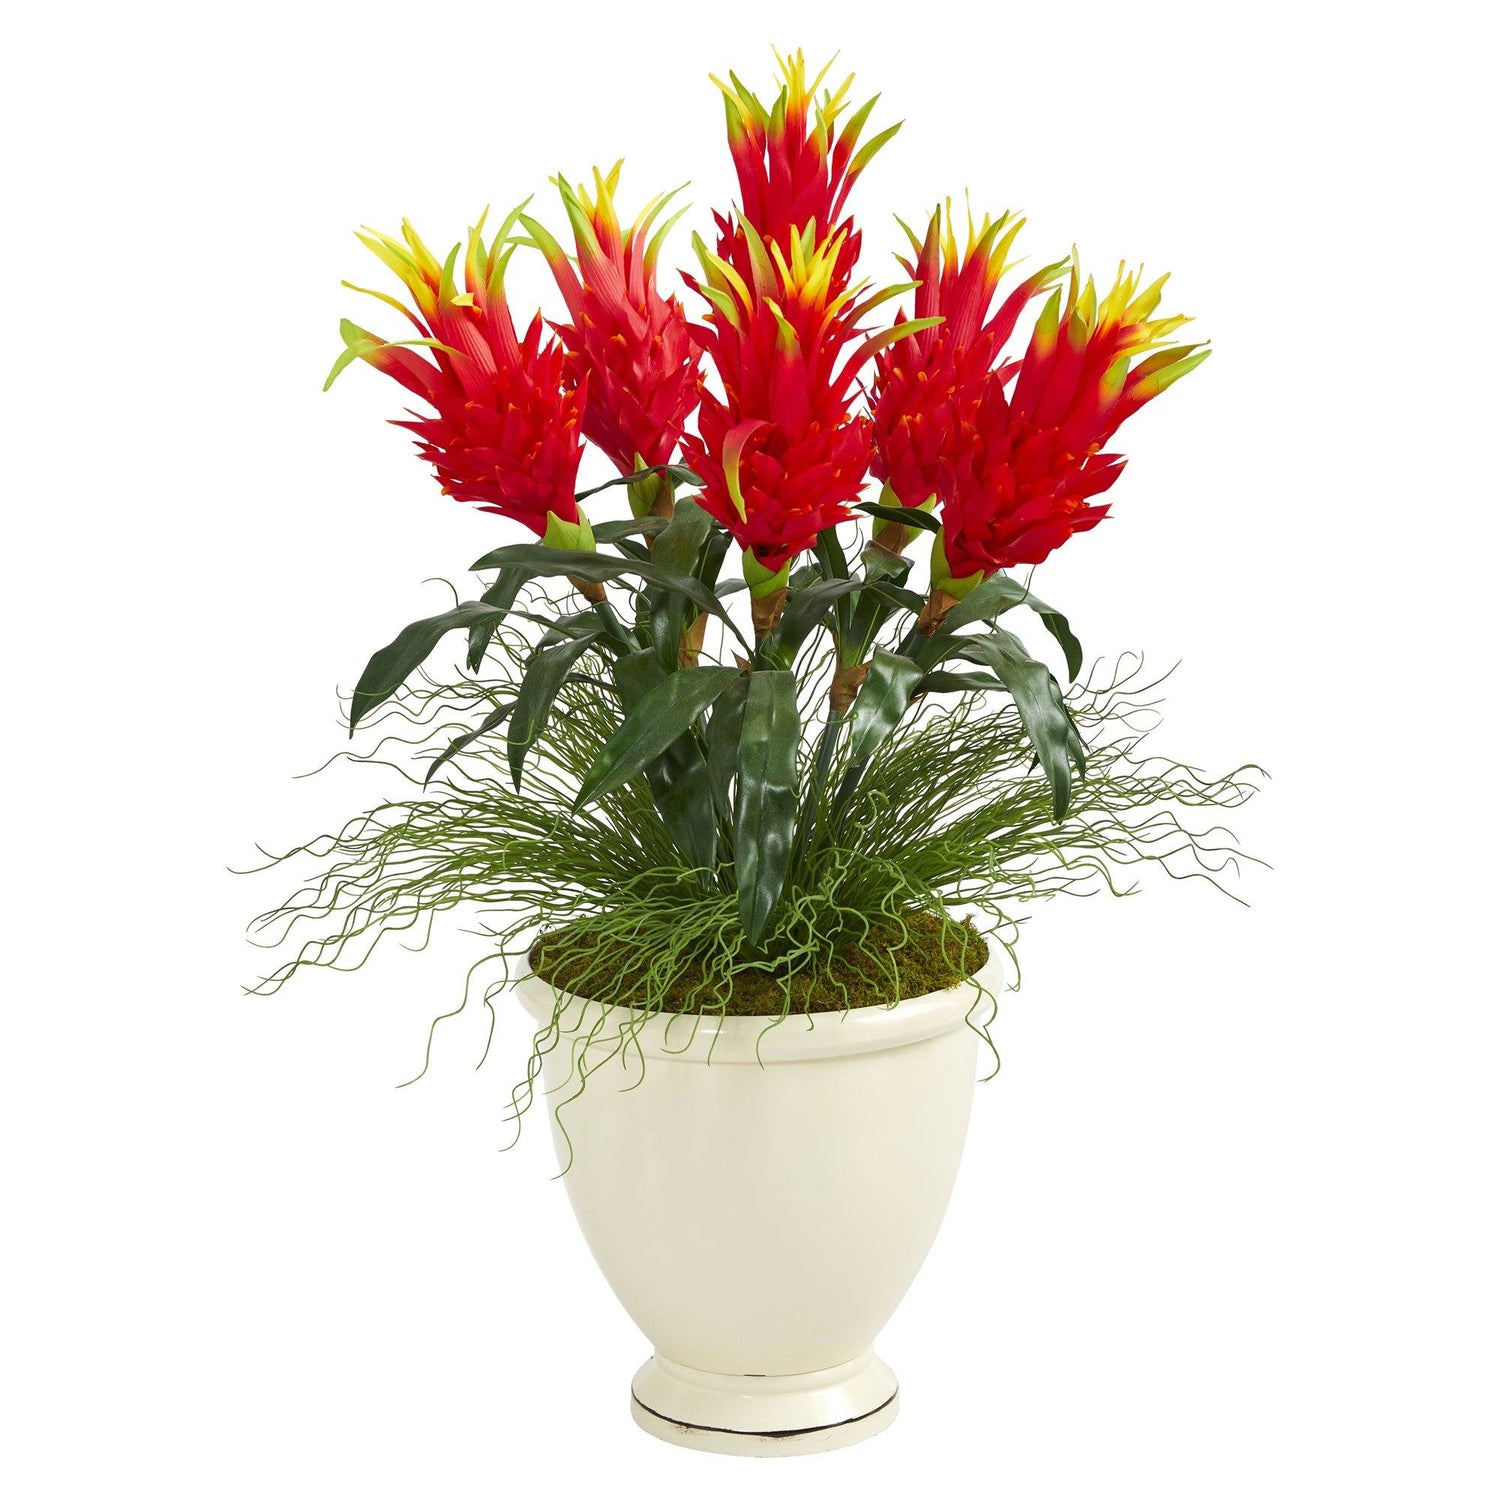 39” Dragon Fruit Artificial Plant in Decorative Urn